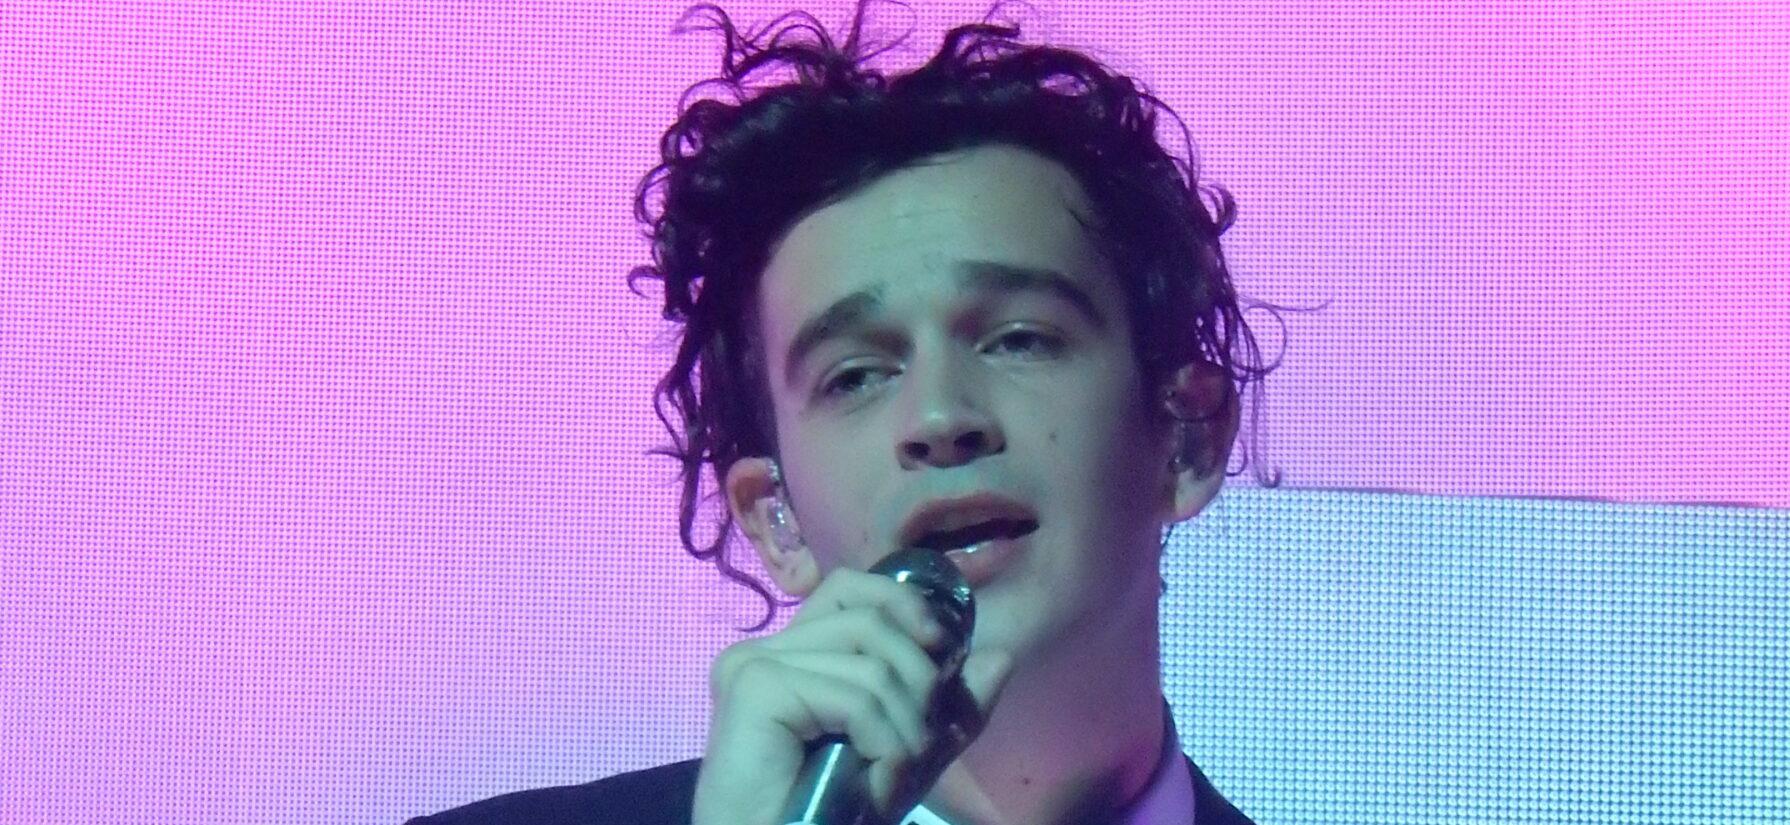 Matty Healy Mocks Malaysian Government’s Ban On The 1975 After Kissing Male Bandmate On Stage